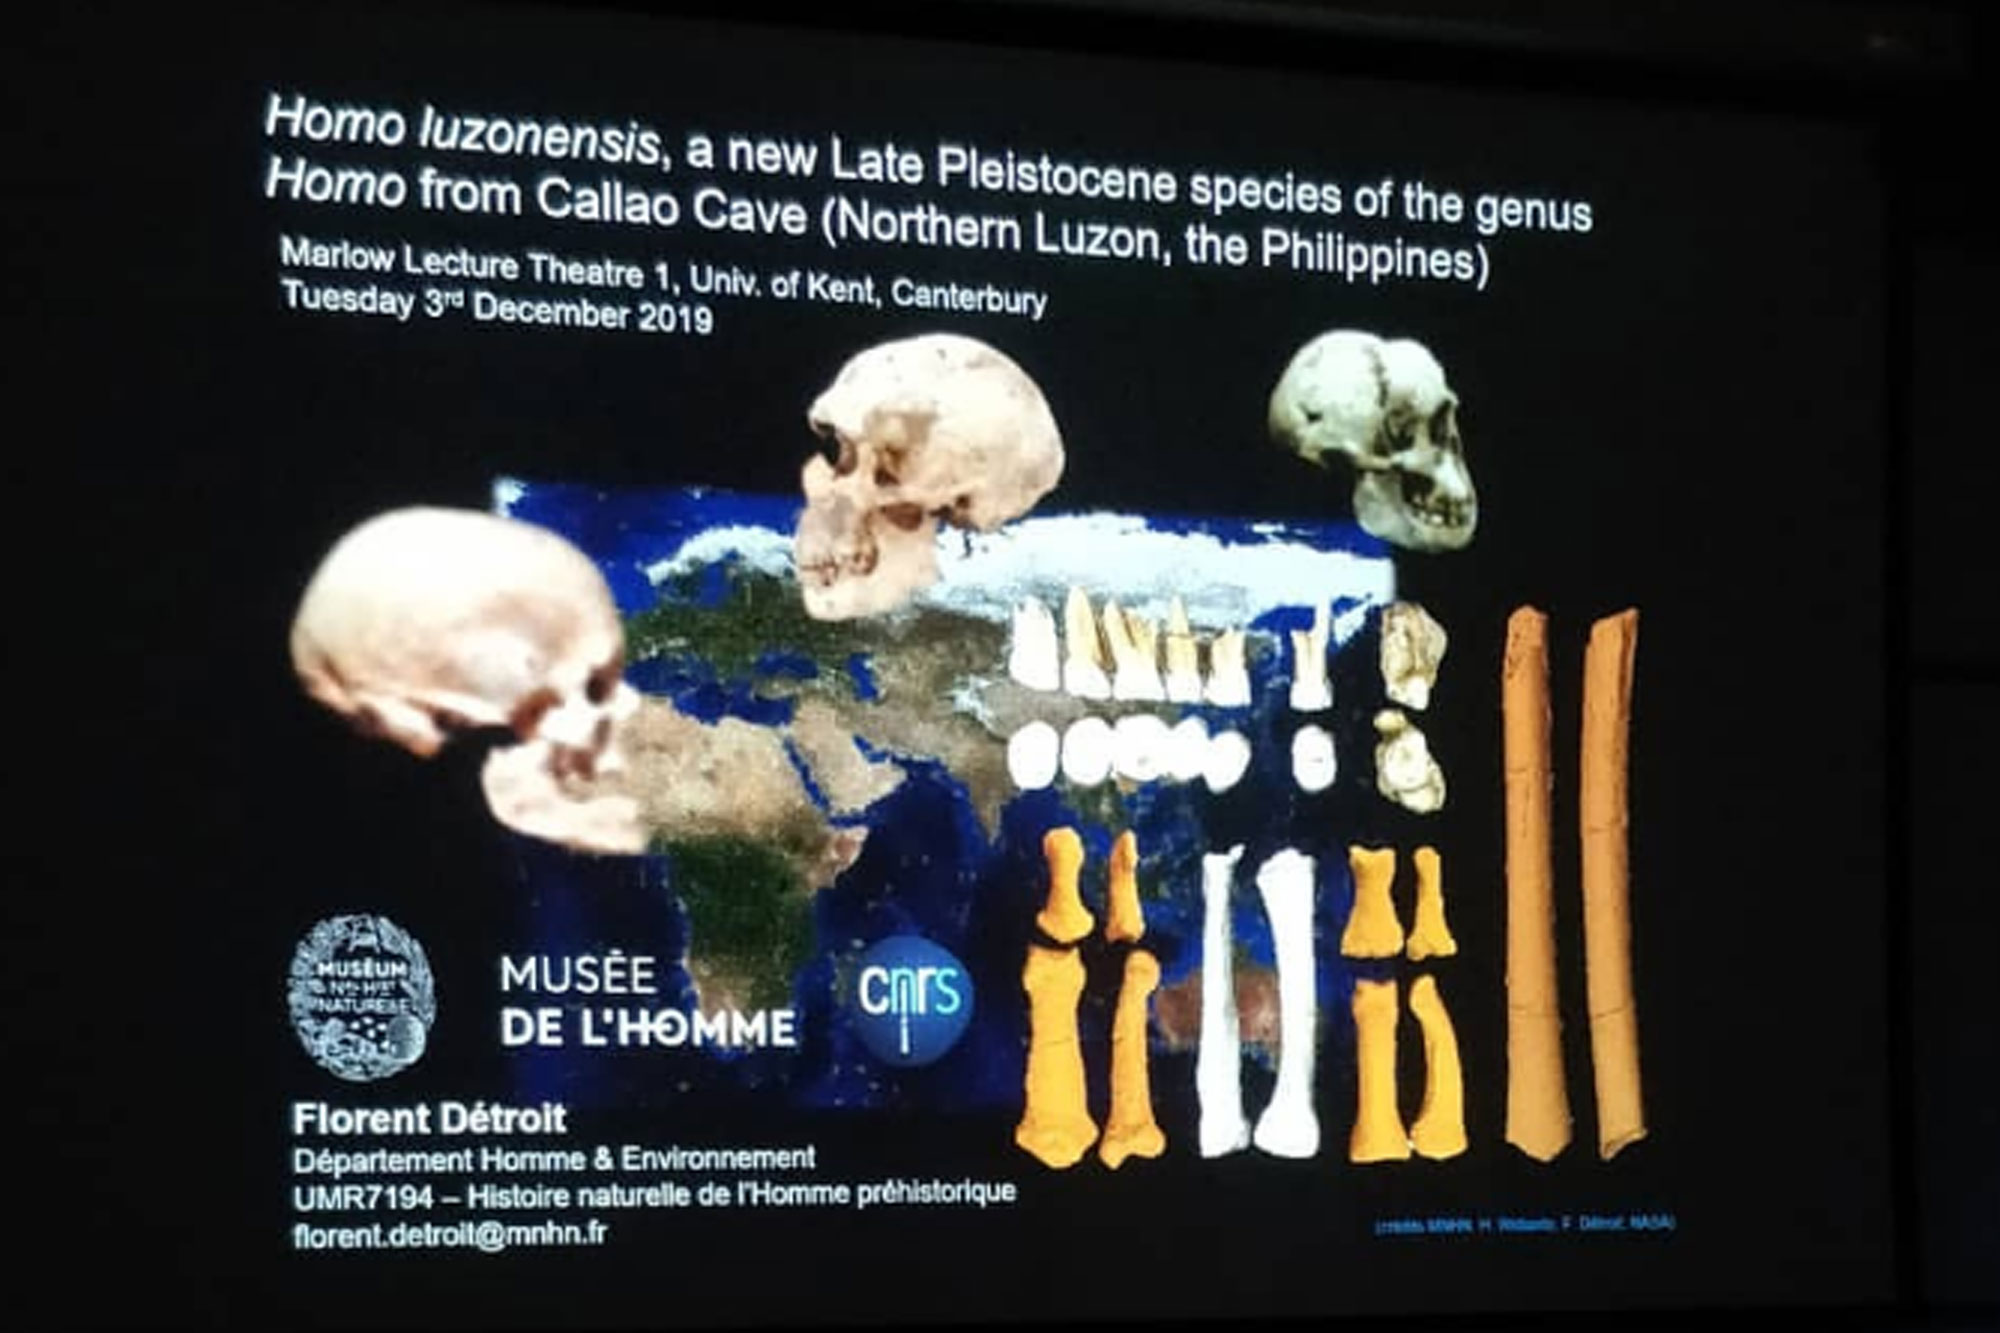 Opening slide for Dr Florent Détroit's talk entitled 'Homo luzonensis, a new species of the genus Homo from the Late Pleistocene of Callao Cave (Northern Luzon, the Philippines)